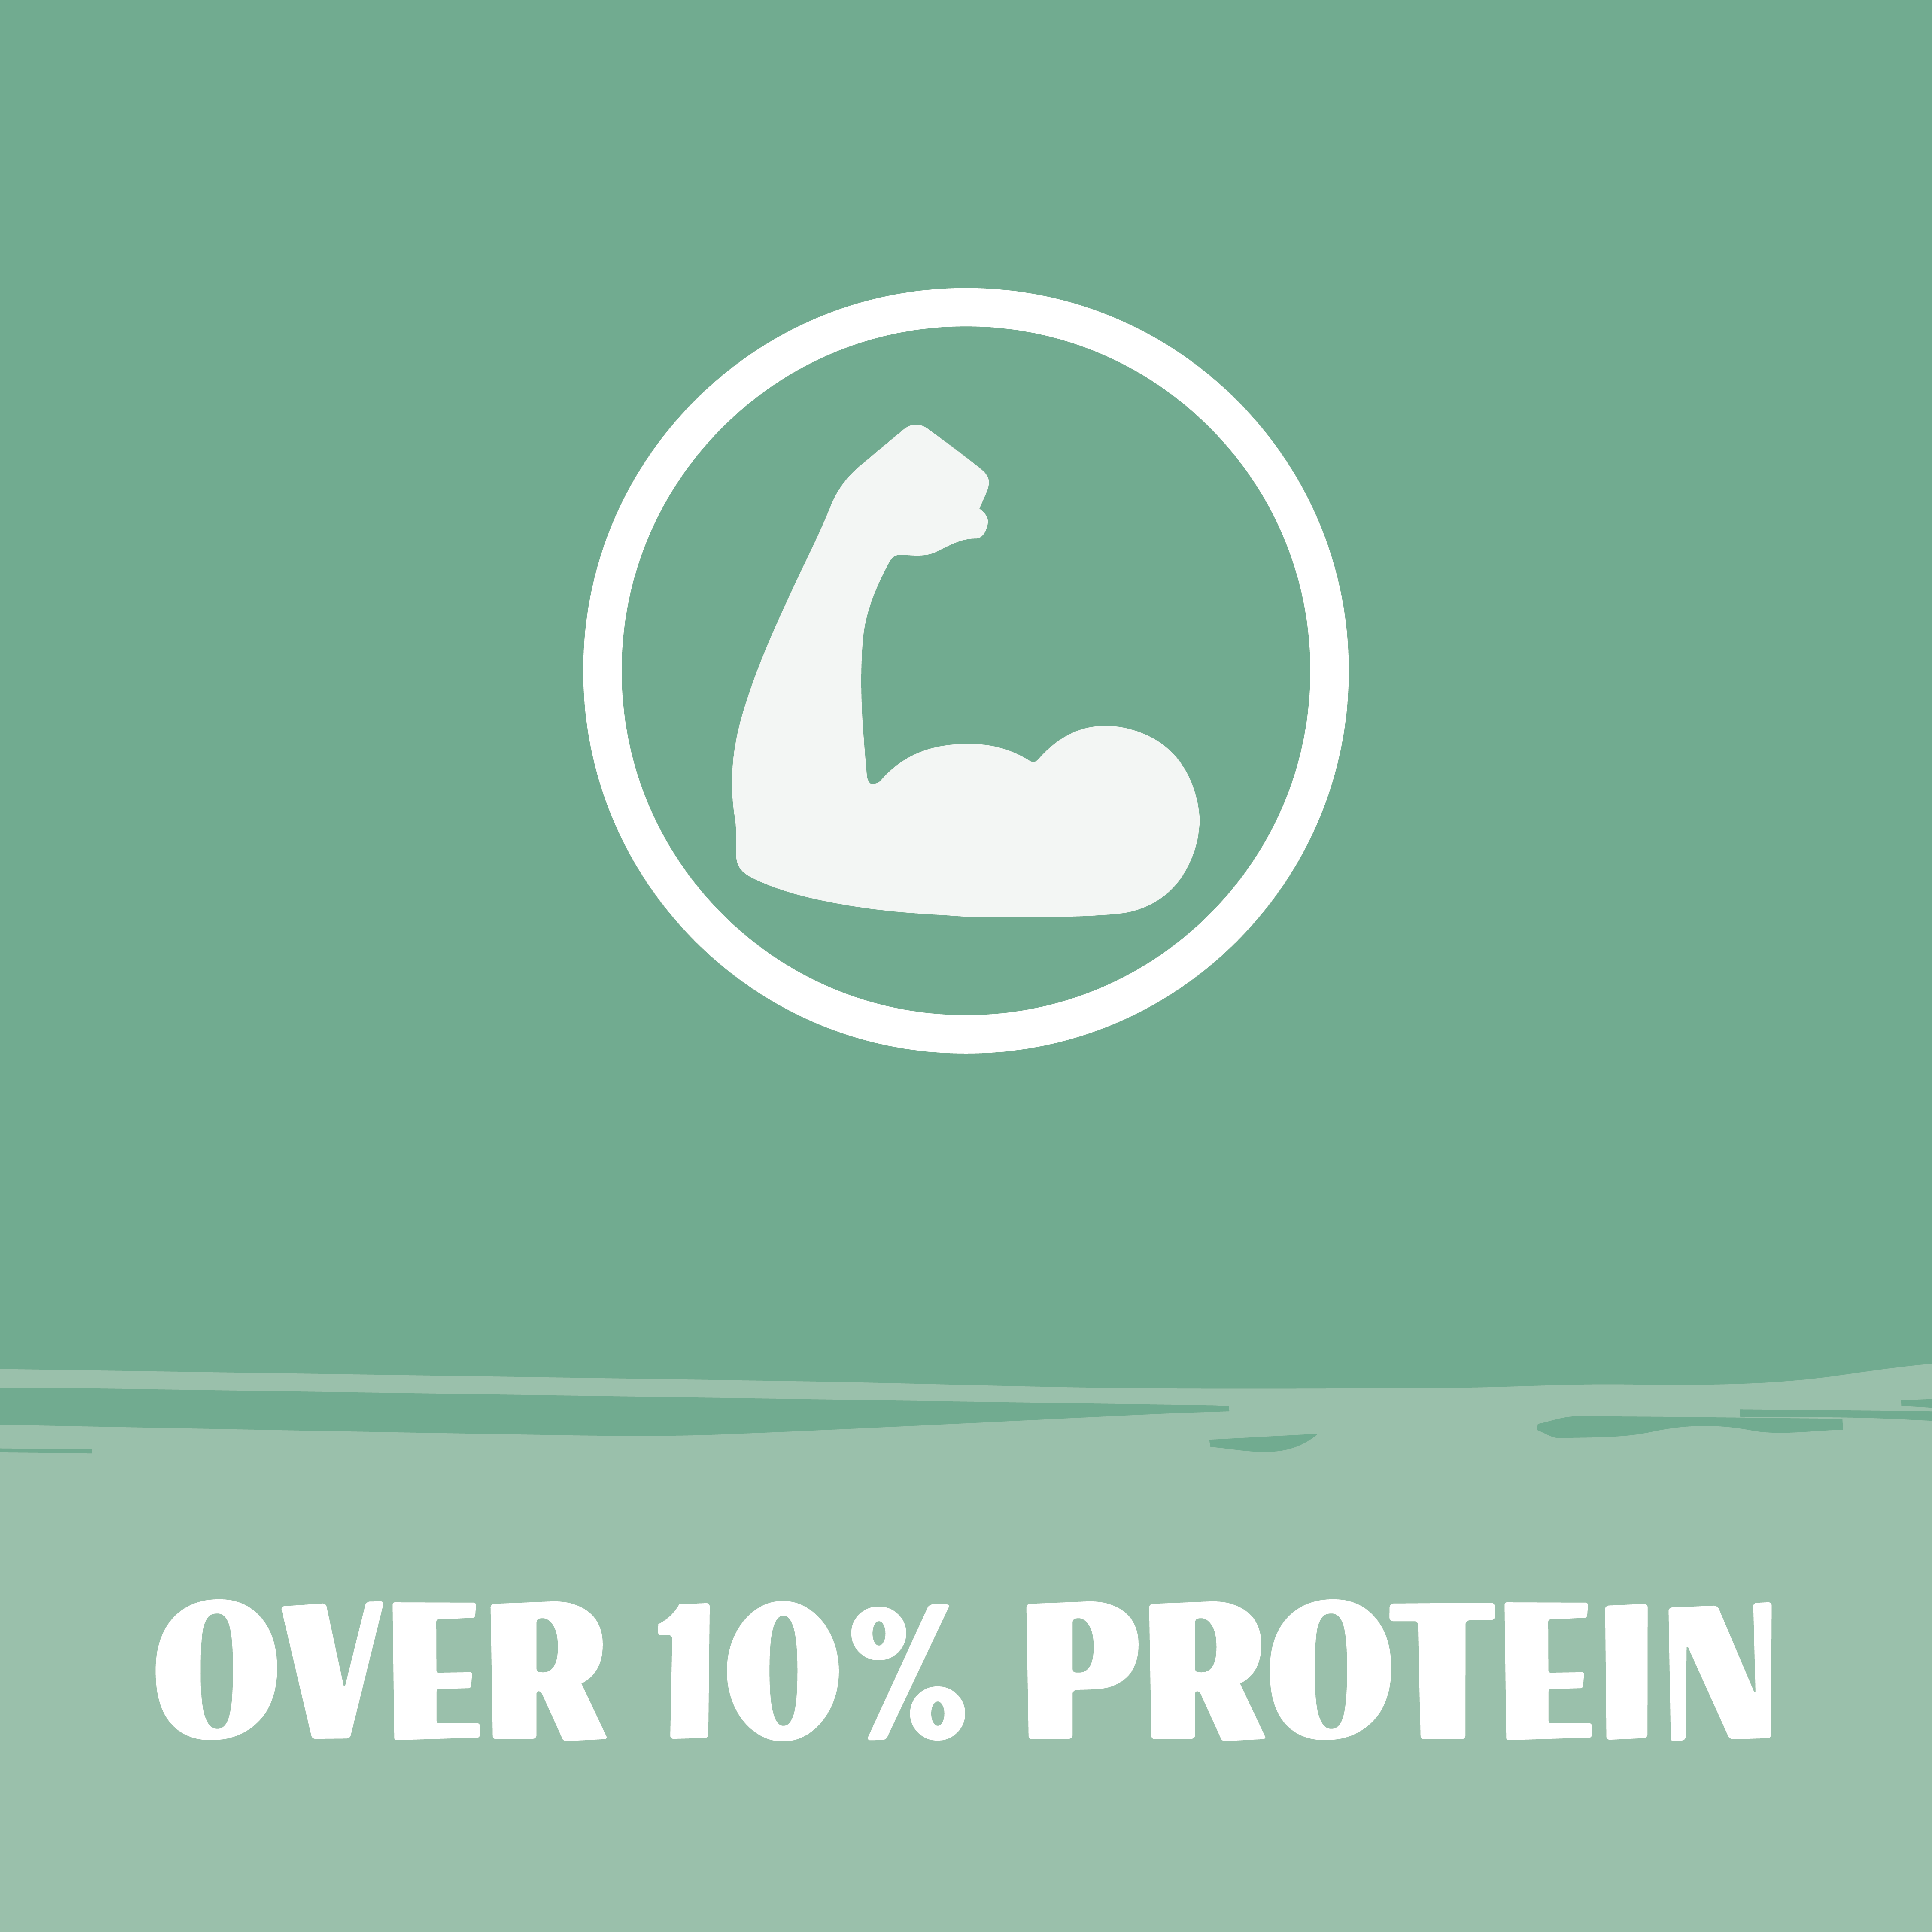 Over 10% protein